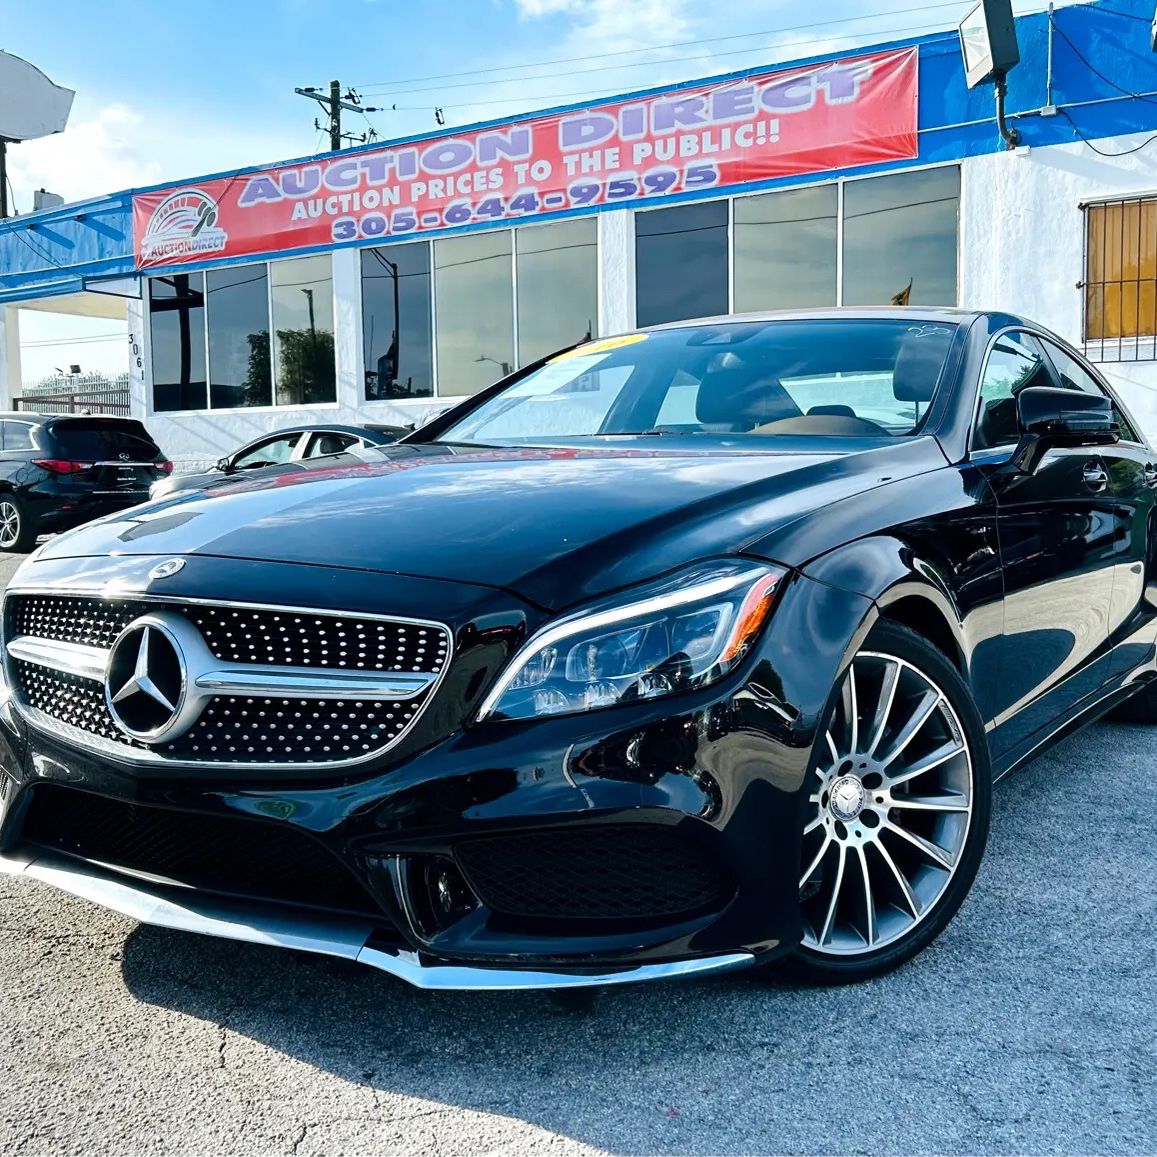 2016 MERCEDES CLS 400!! !!WOW!!! THE PERFECT COLOR COMBO **